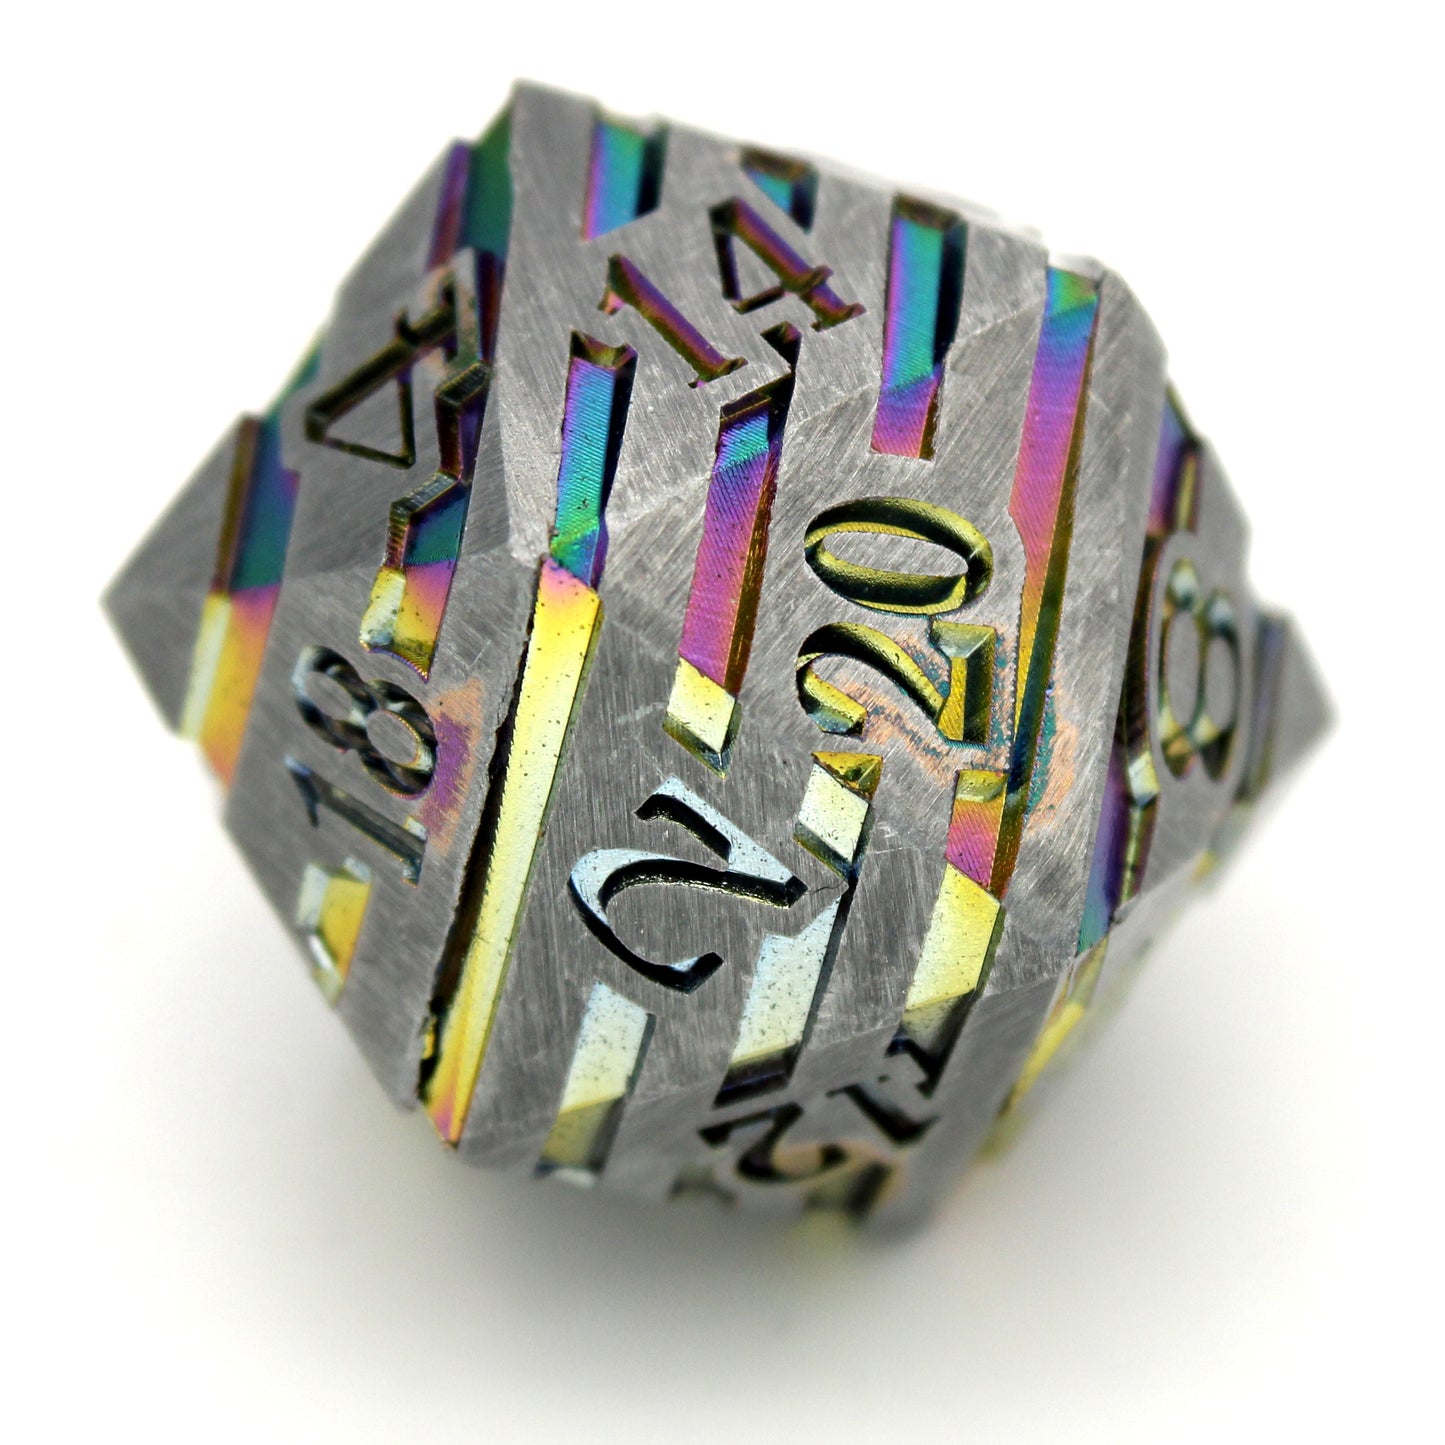 Stunlocked is an 8-piece set of silvery zinc dice, shot through with streaks of rainbow neochrome.